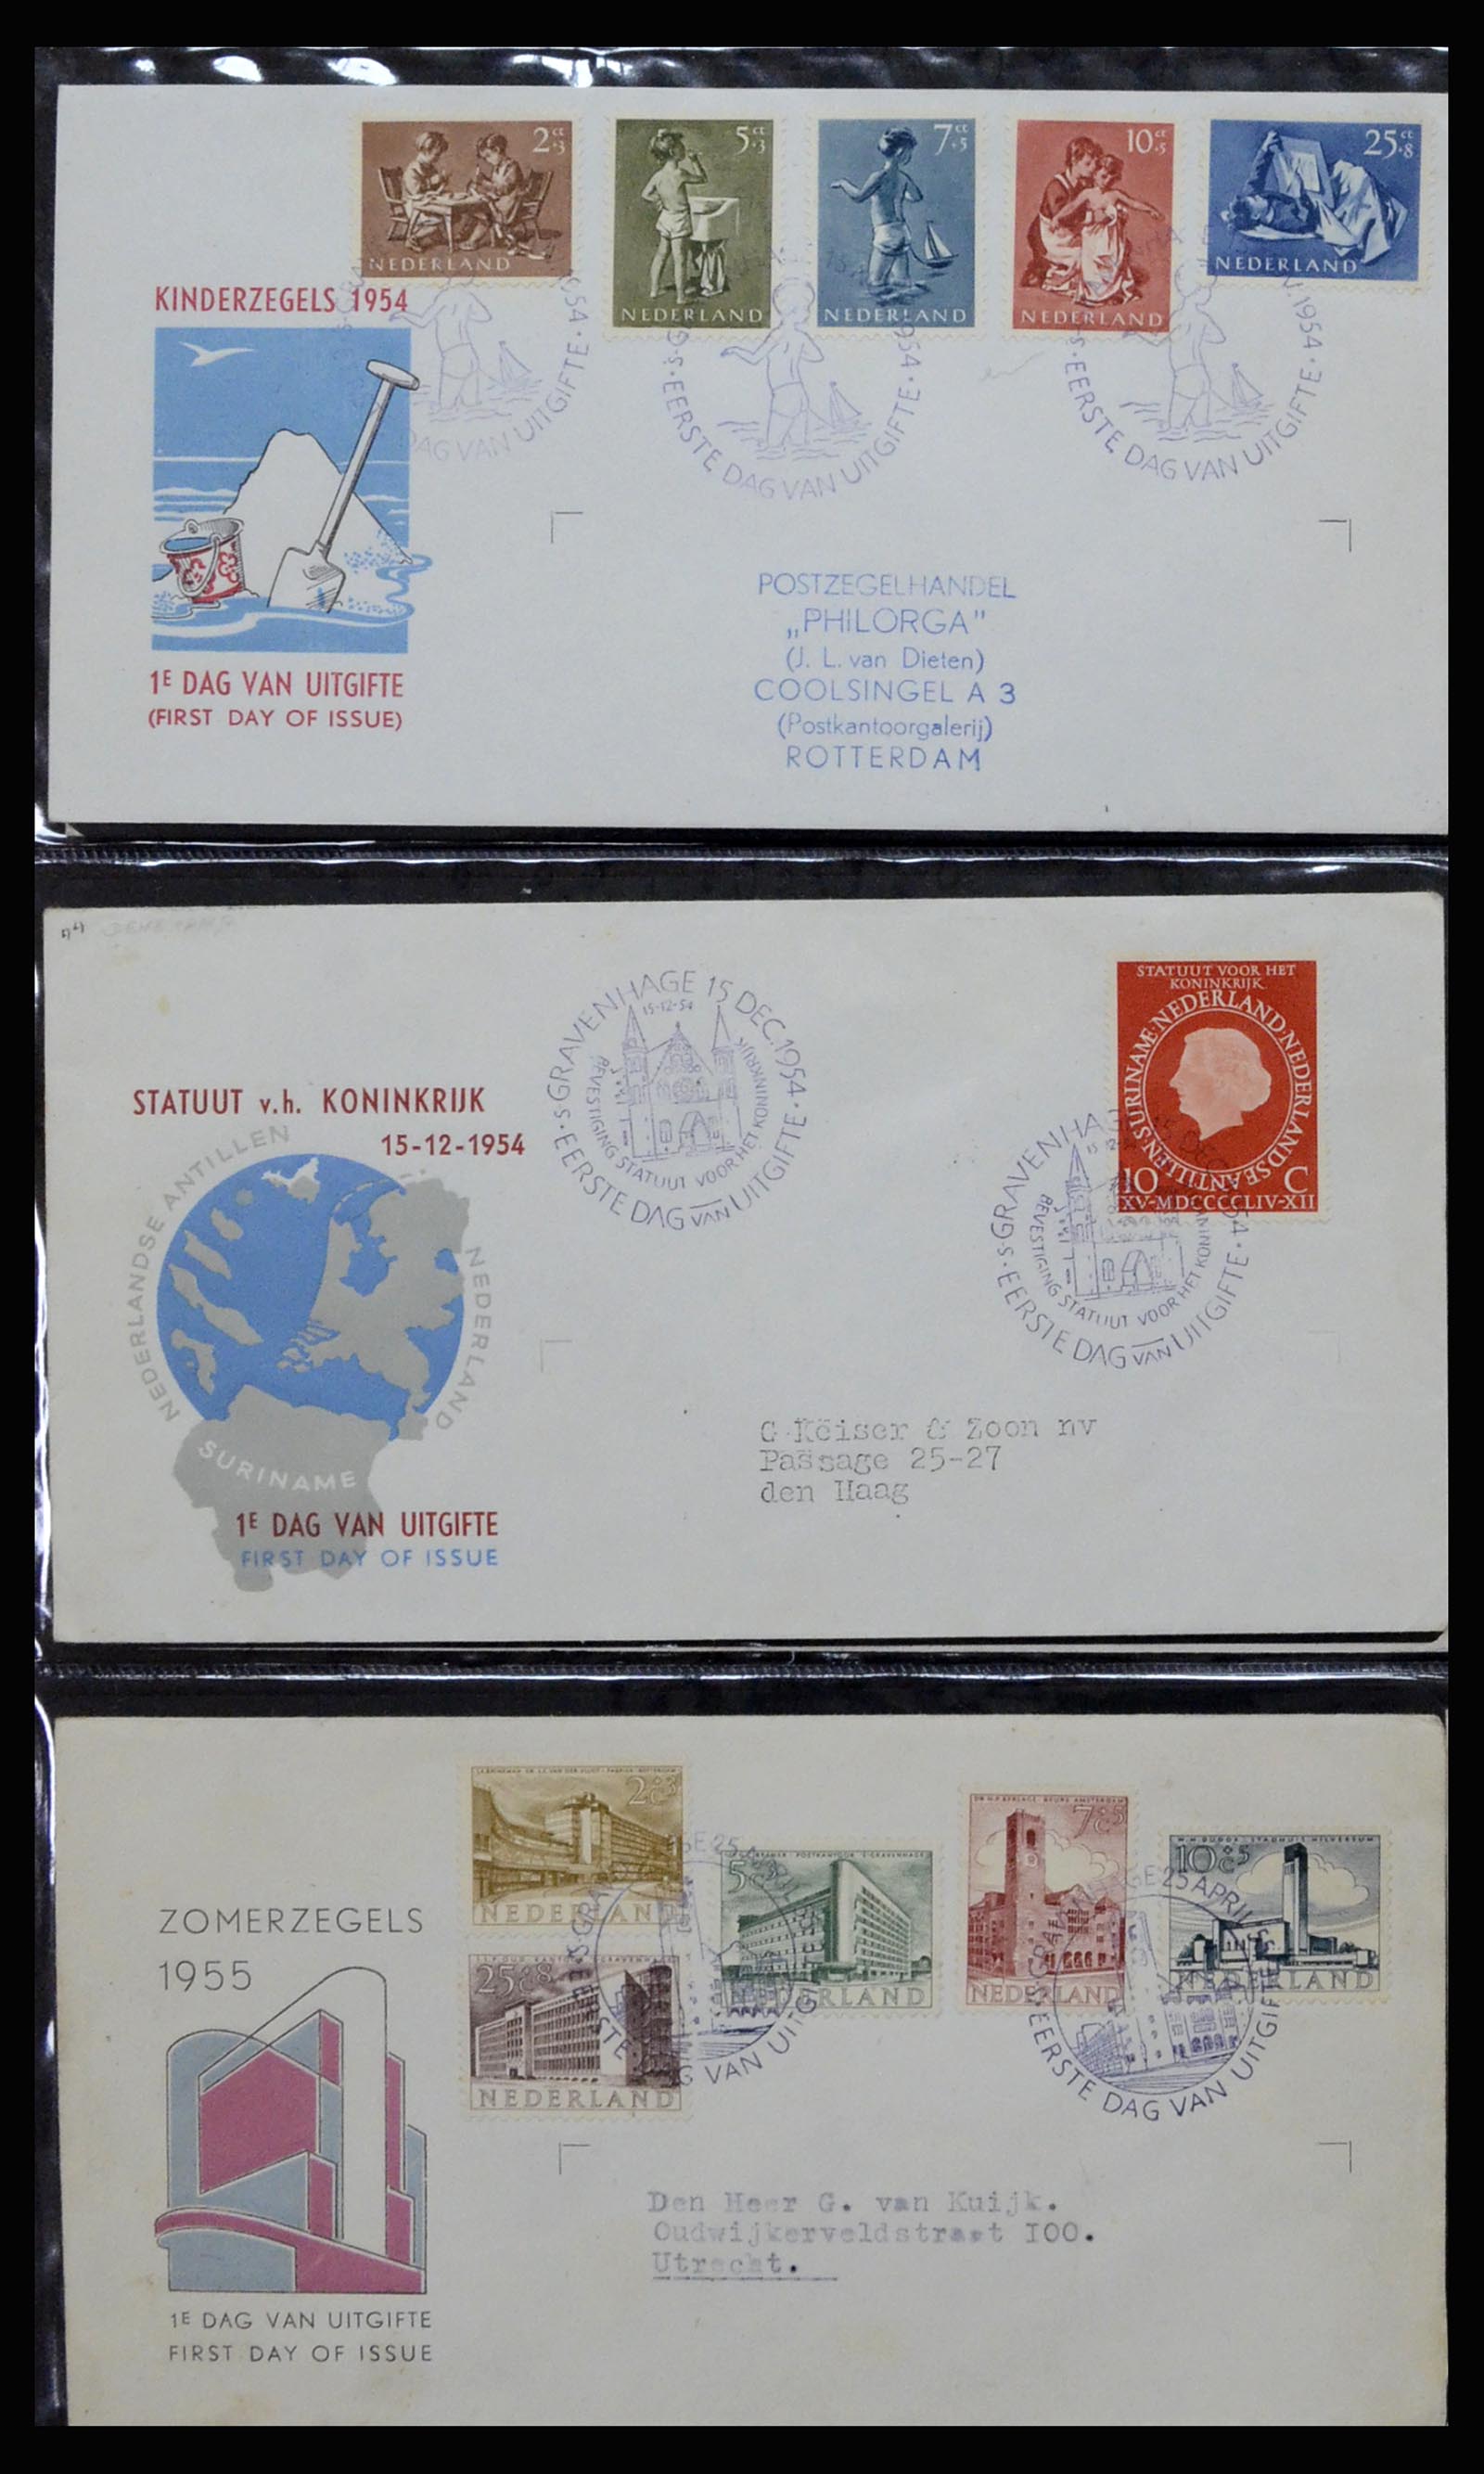 37197 008 - Stamp collection 37197 Netherlands FDC's 1950-2004.